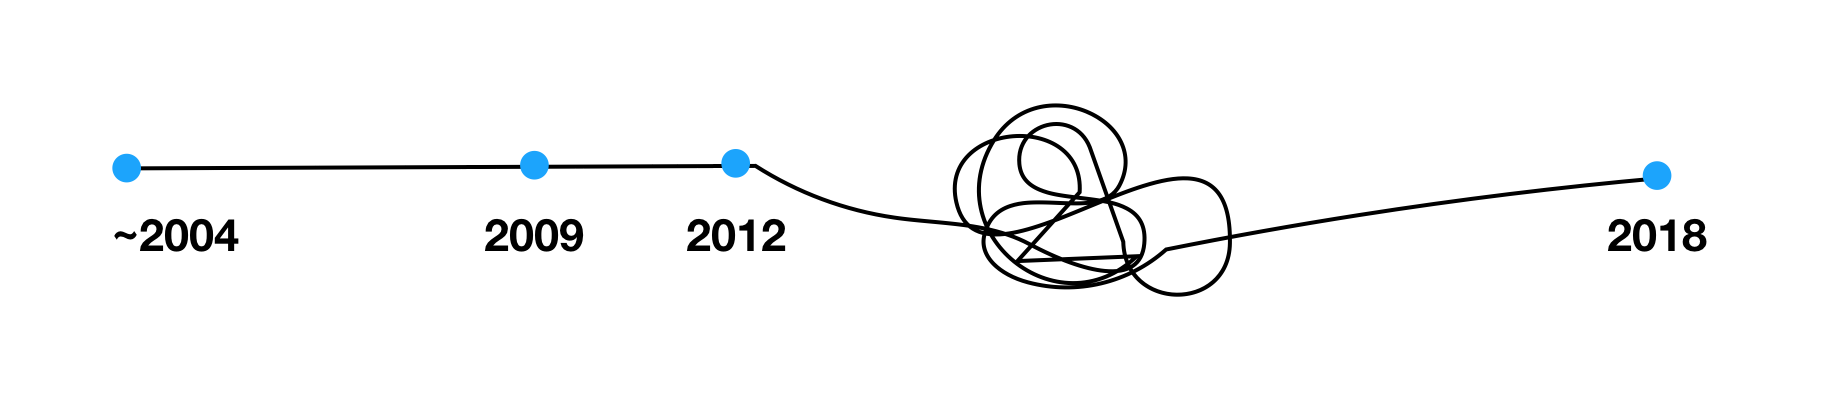 Timeline view from 2004 to 2018. After 2012 the line goes down and a scribble happens between 2012 and 2018